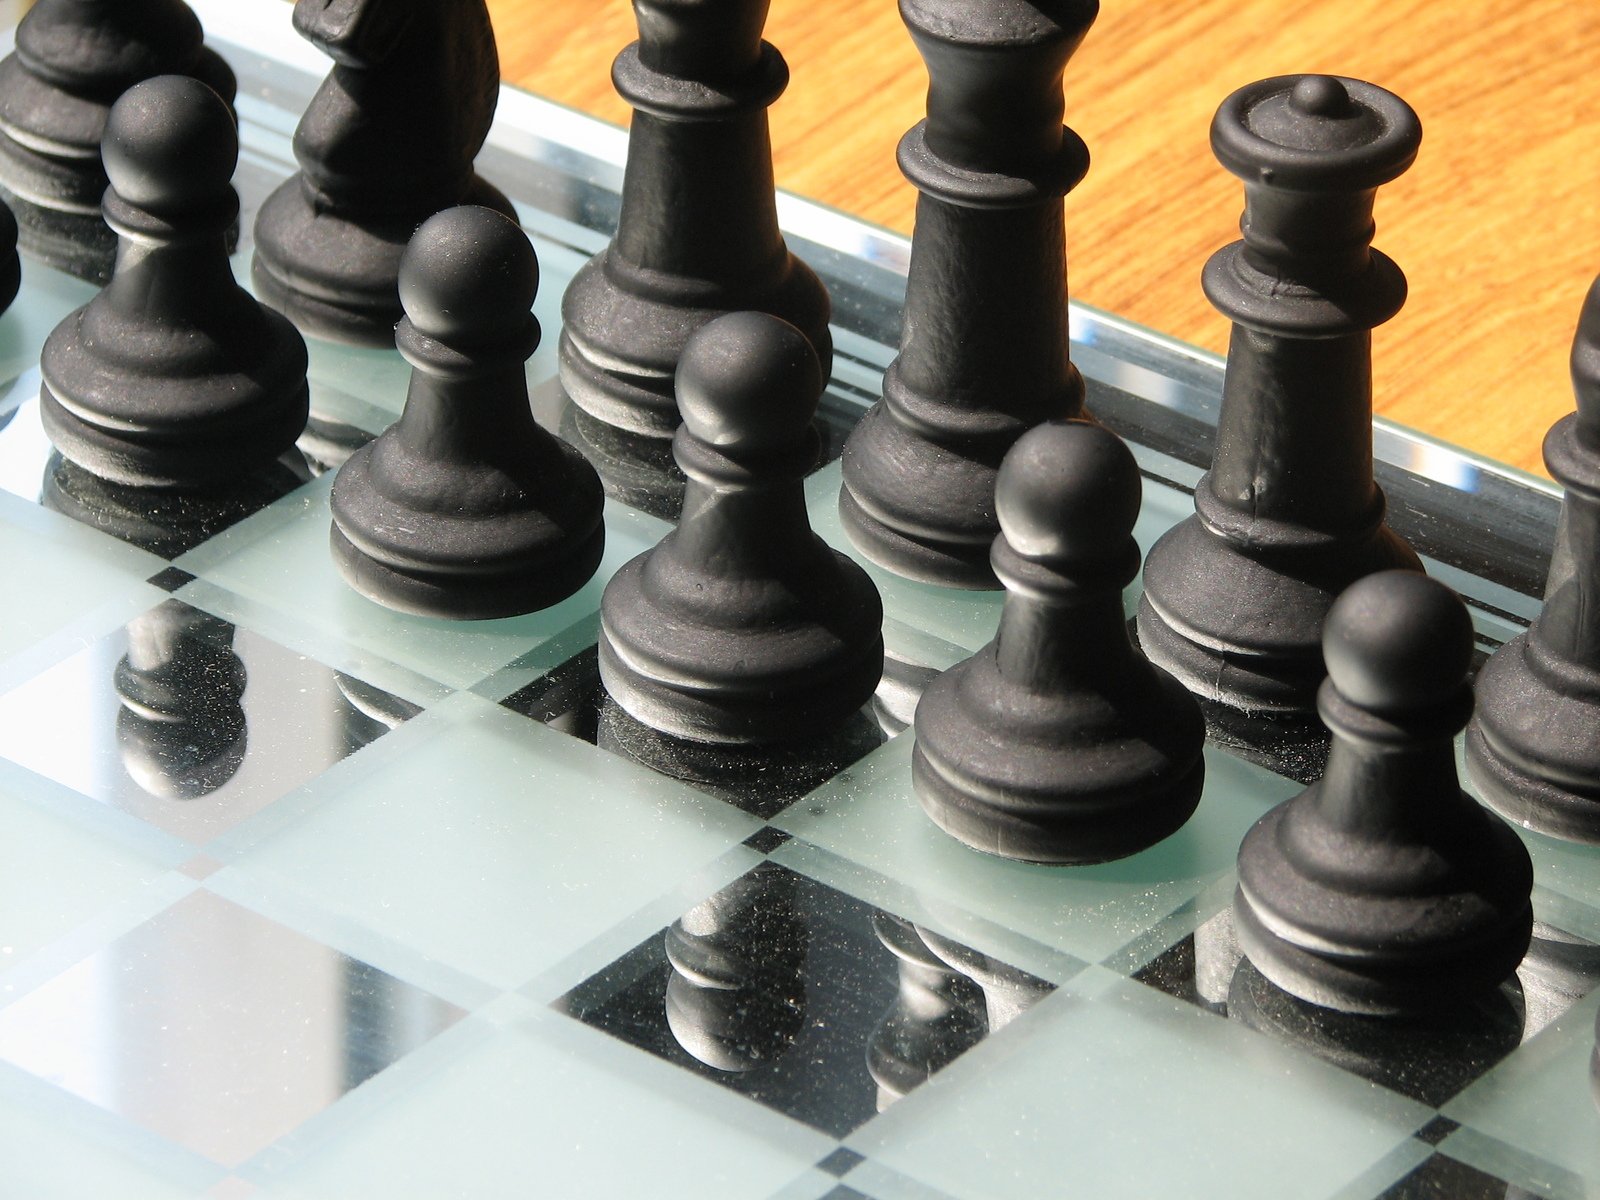 a chess board with some black chess pieces